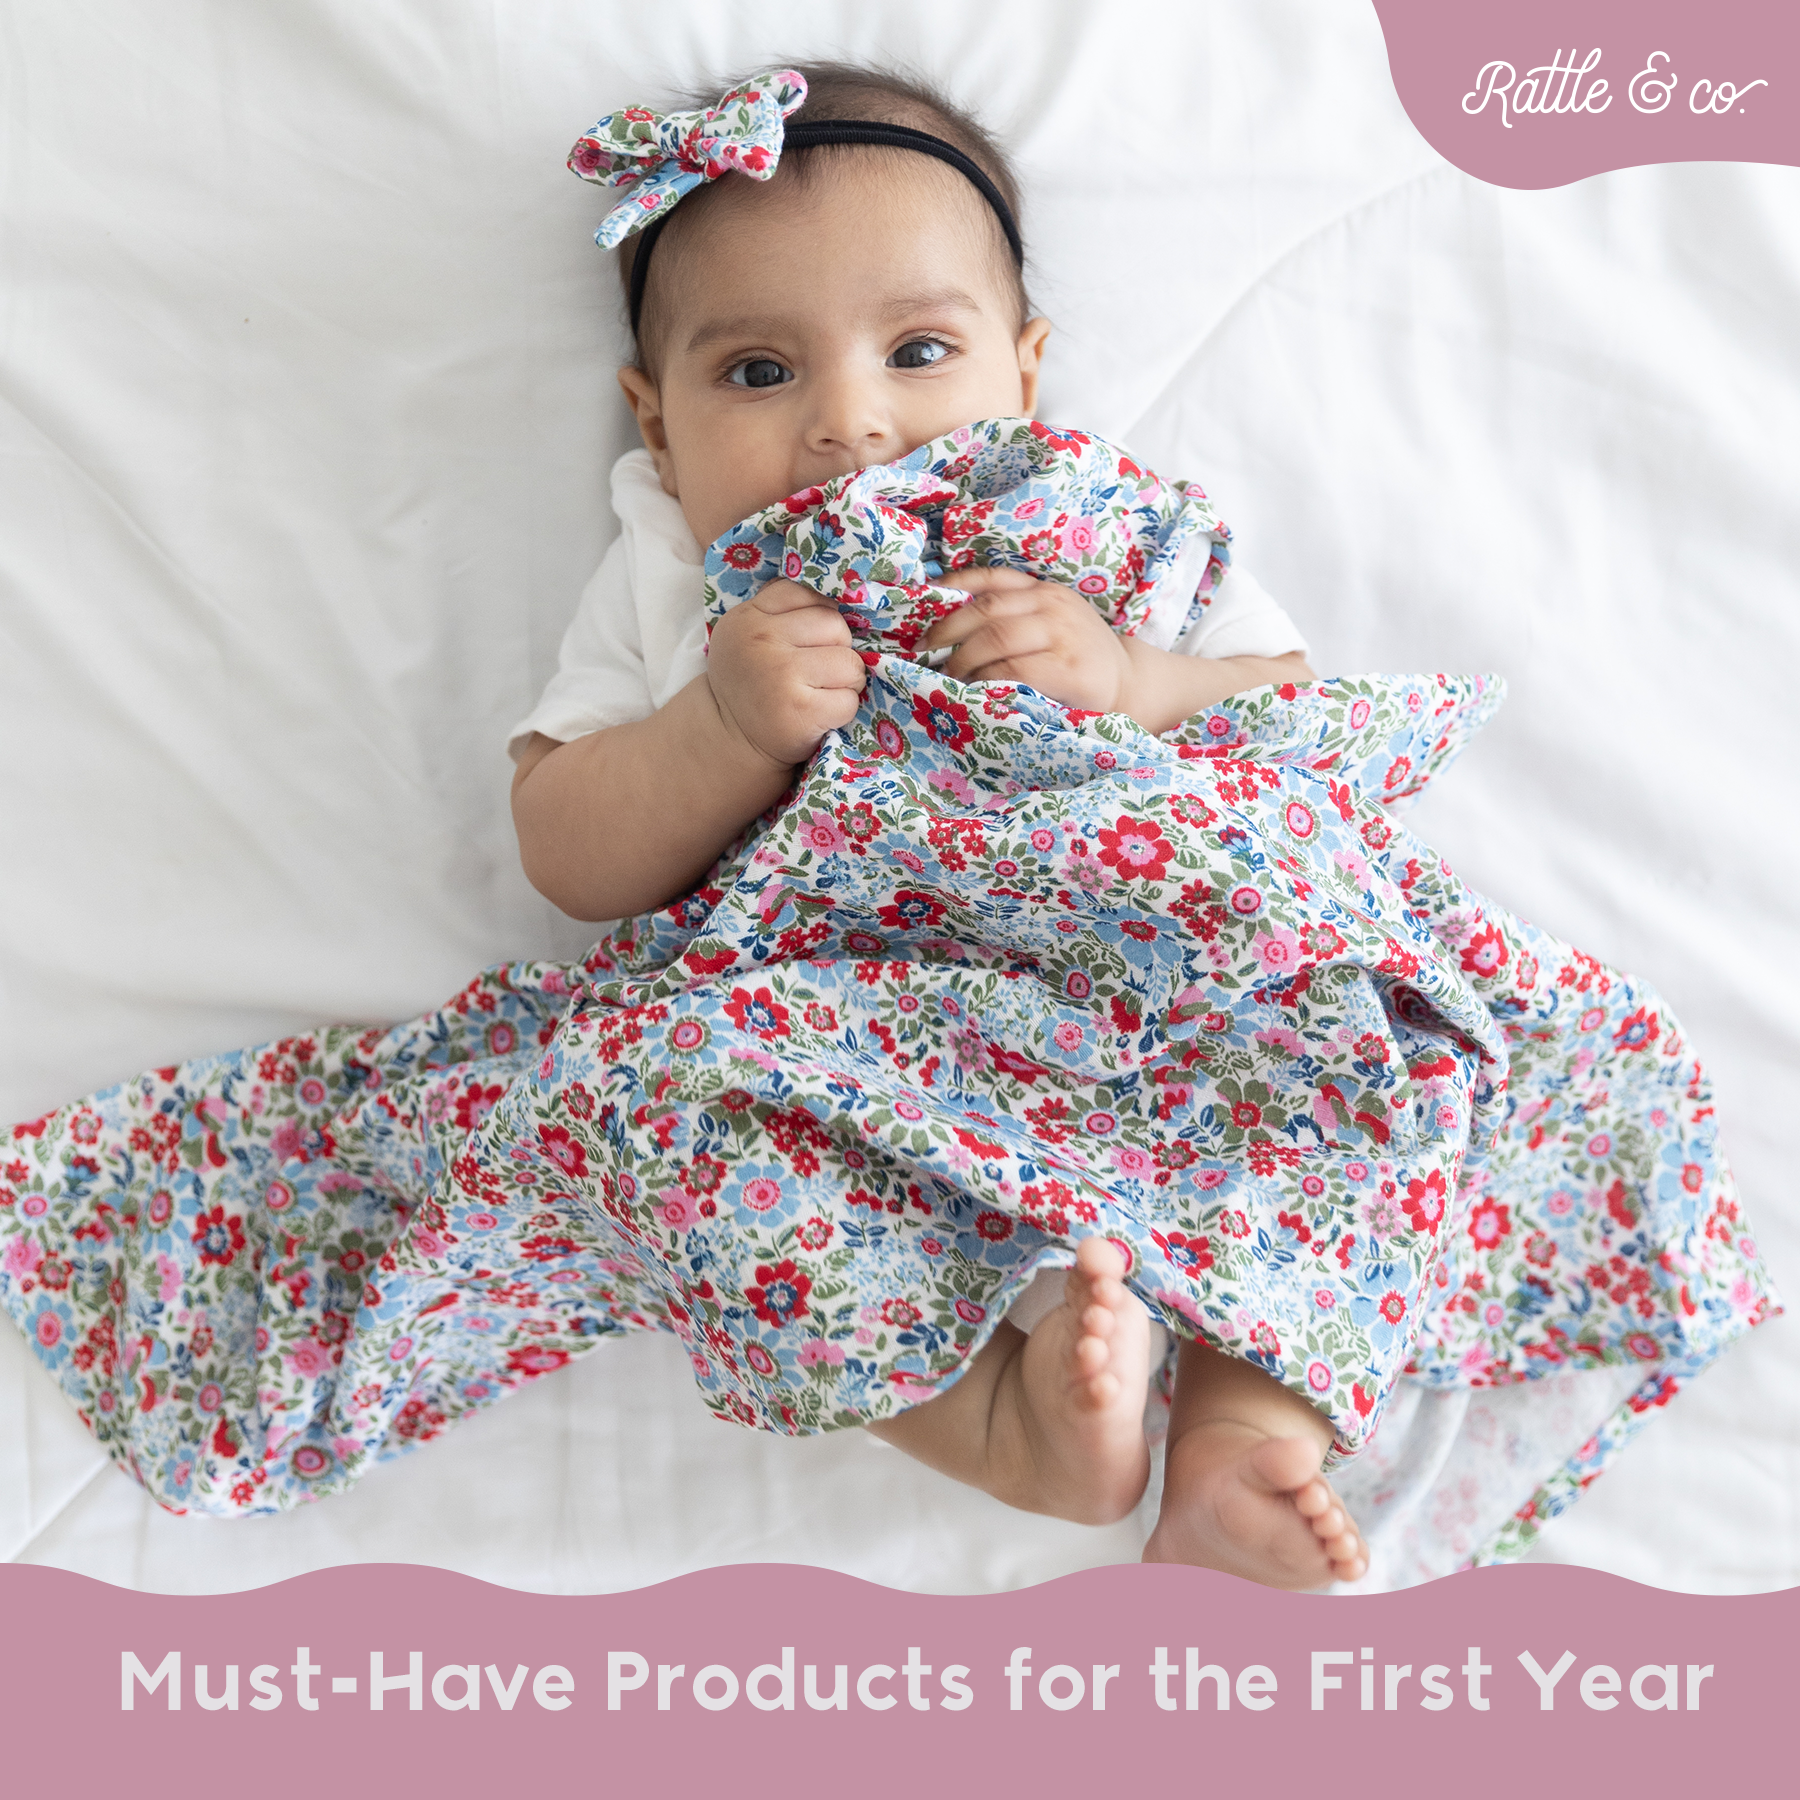 Parenting Essentials: Rattle & Co.'s Must-Have Products for the First Year